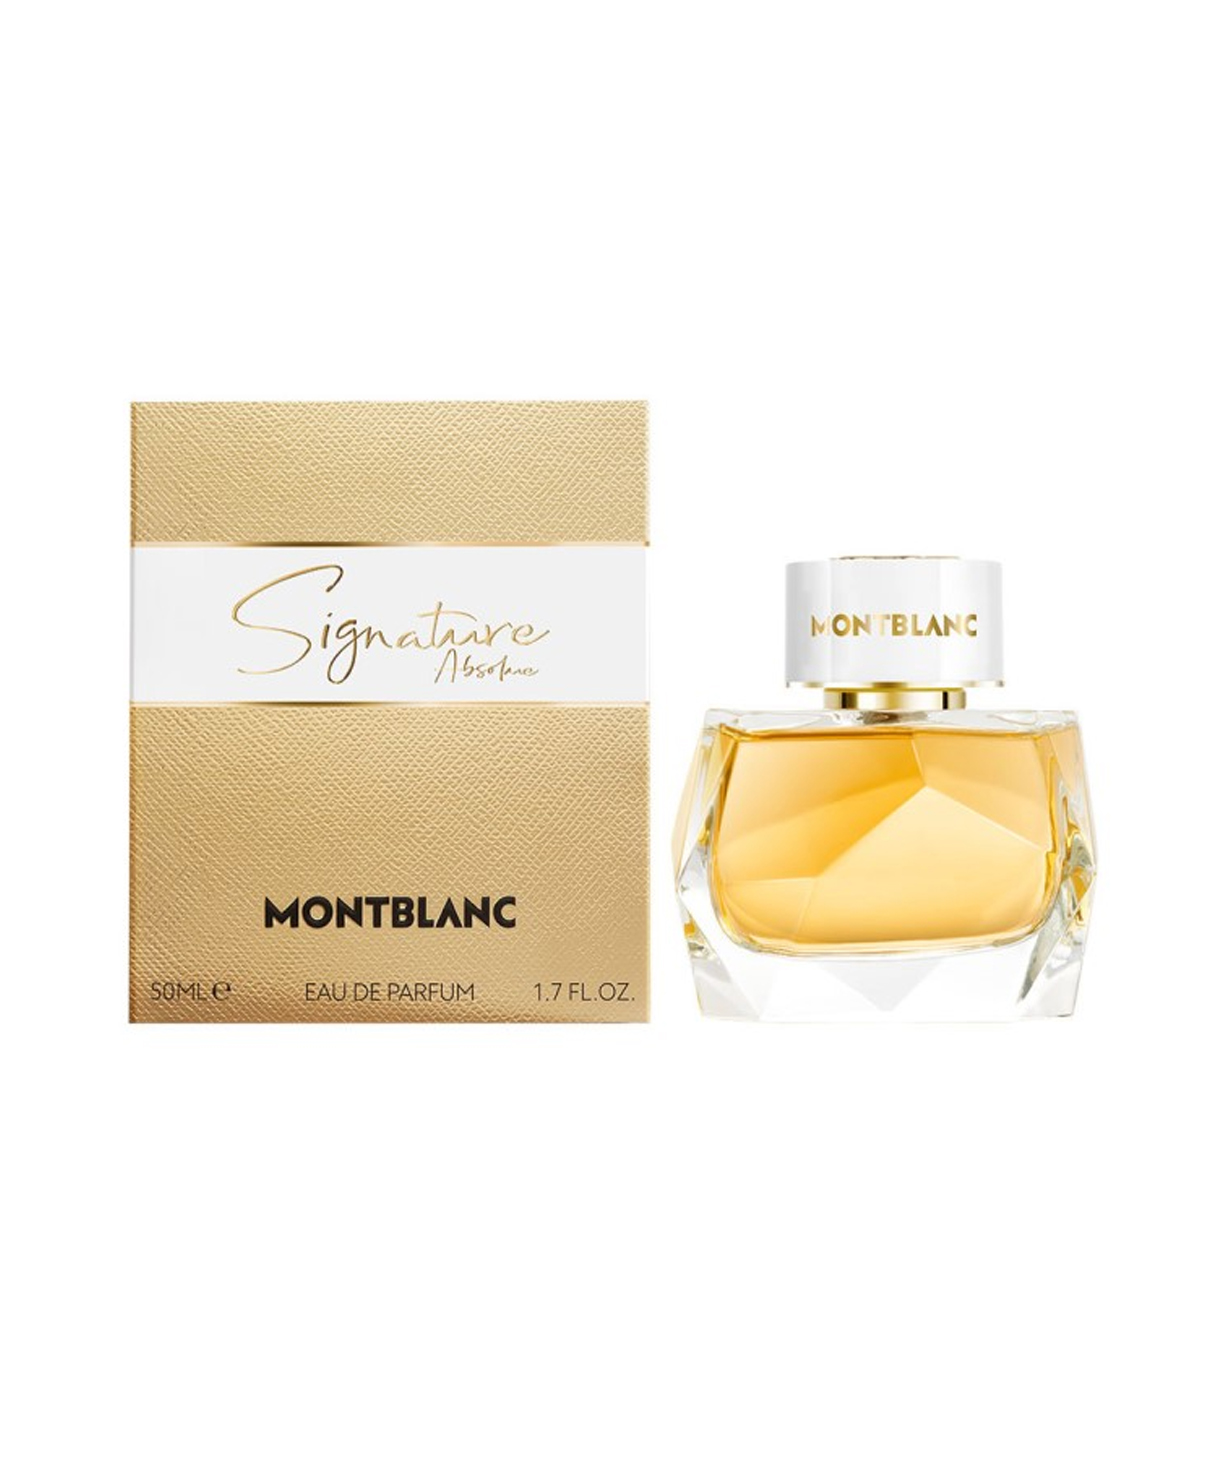 Perfume «Montblanc» Signature Absolu, for women, 50 ml